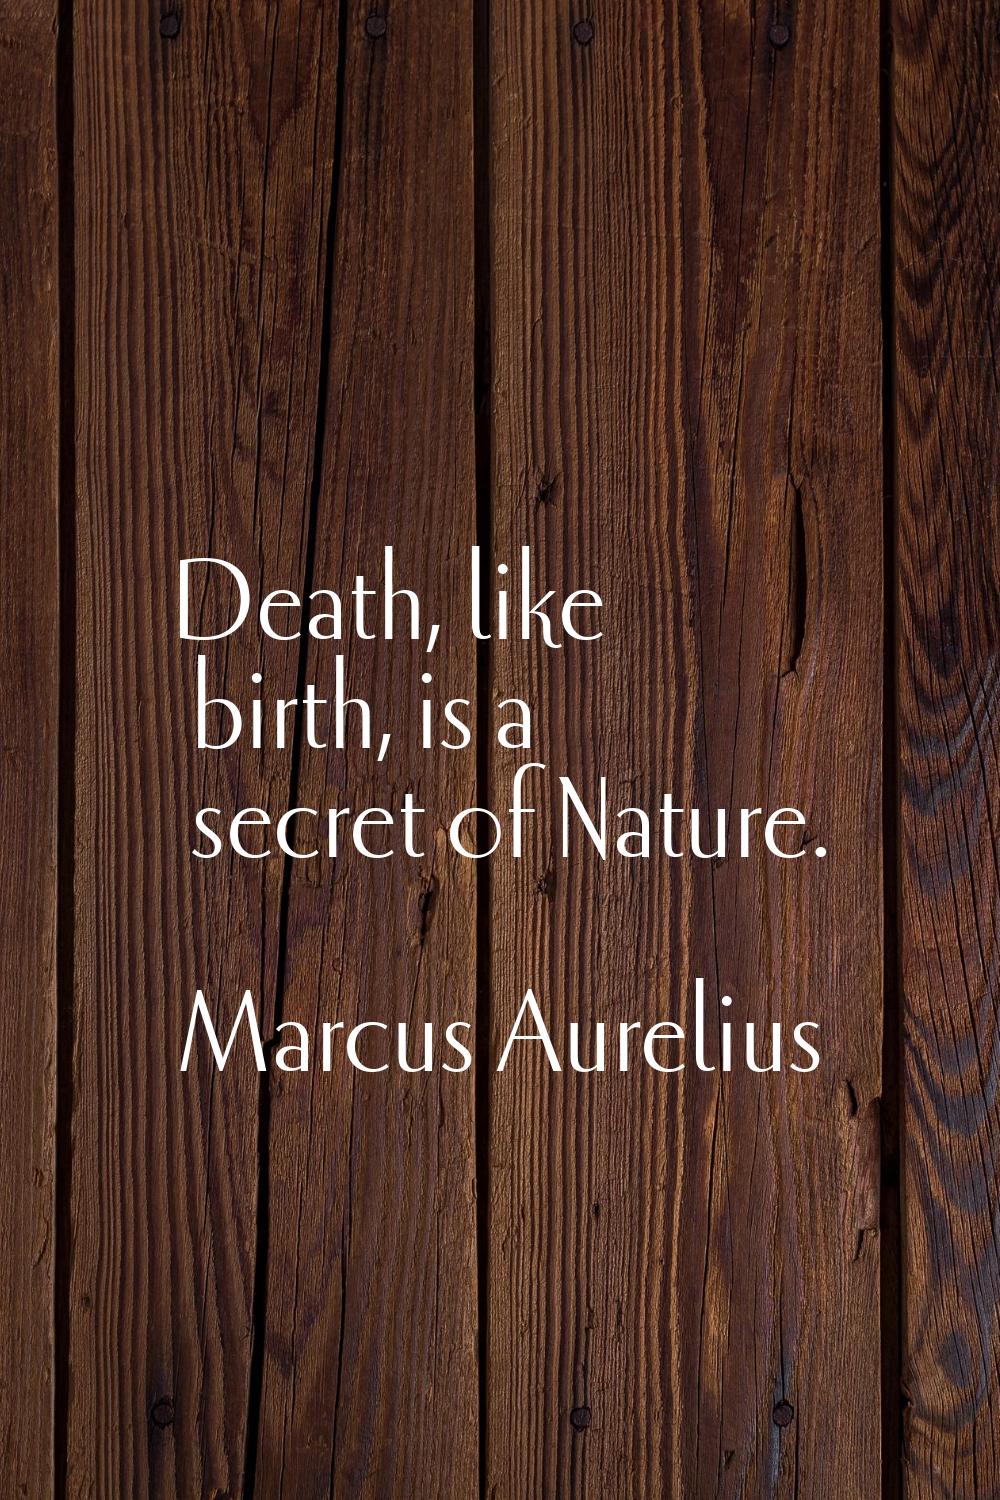 Death, like birth, is a secret of Nature.